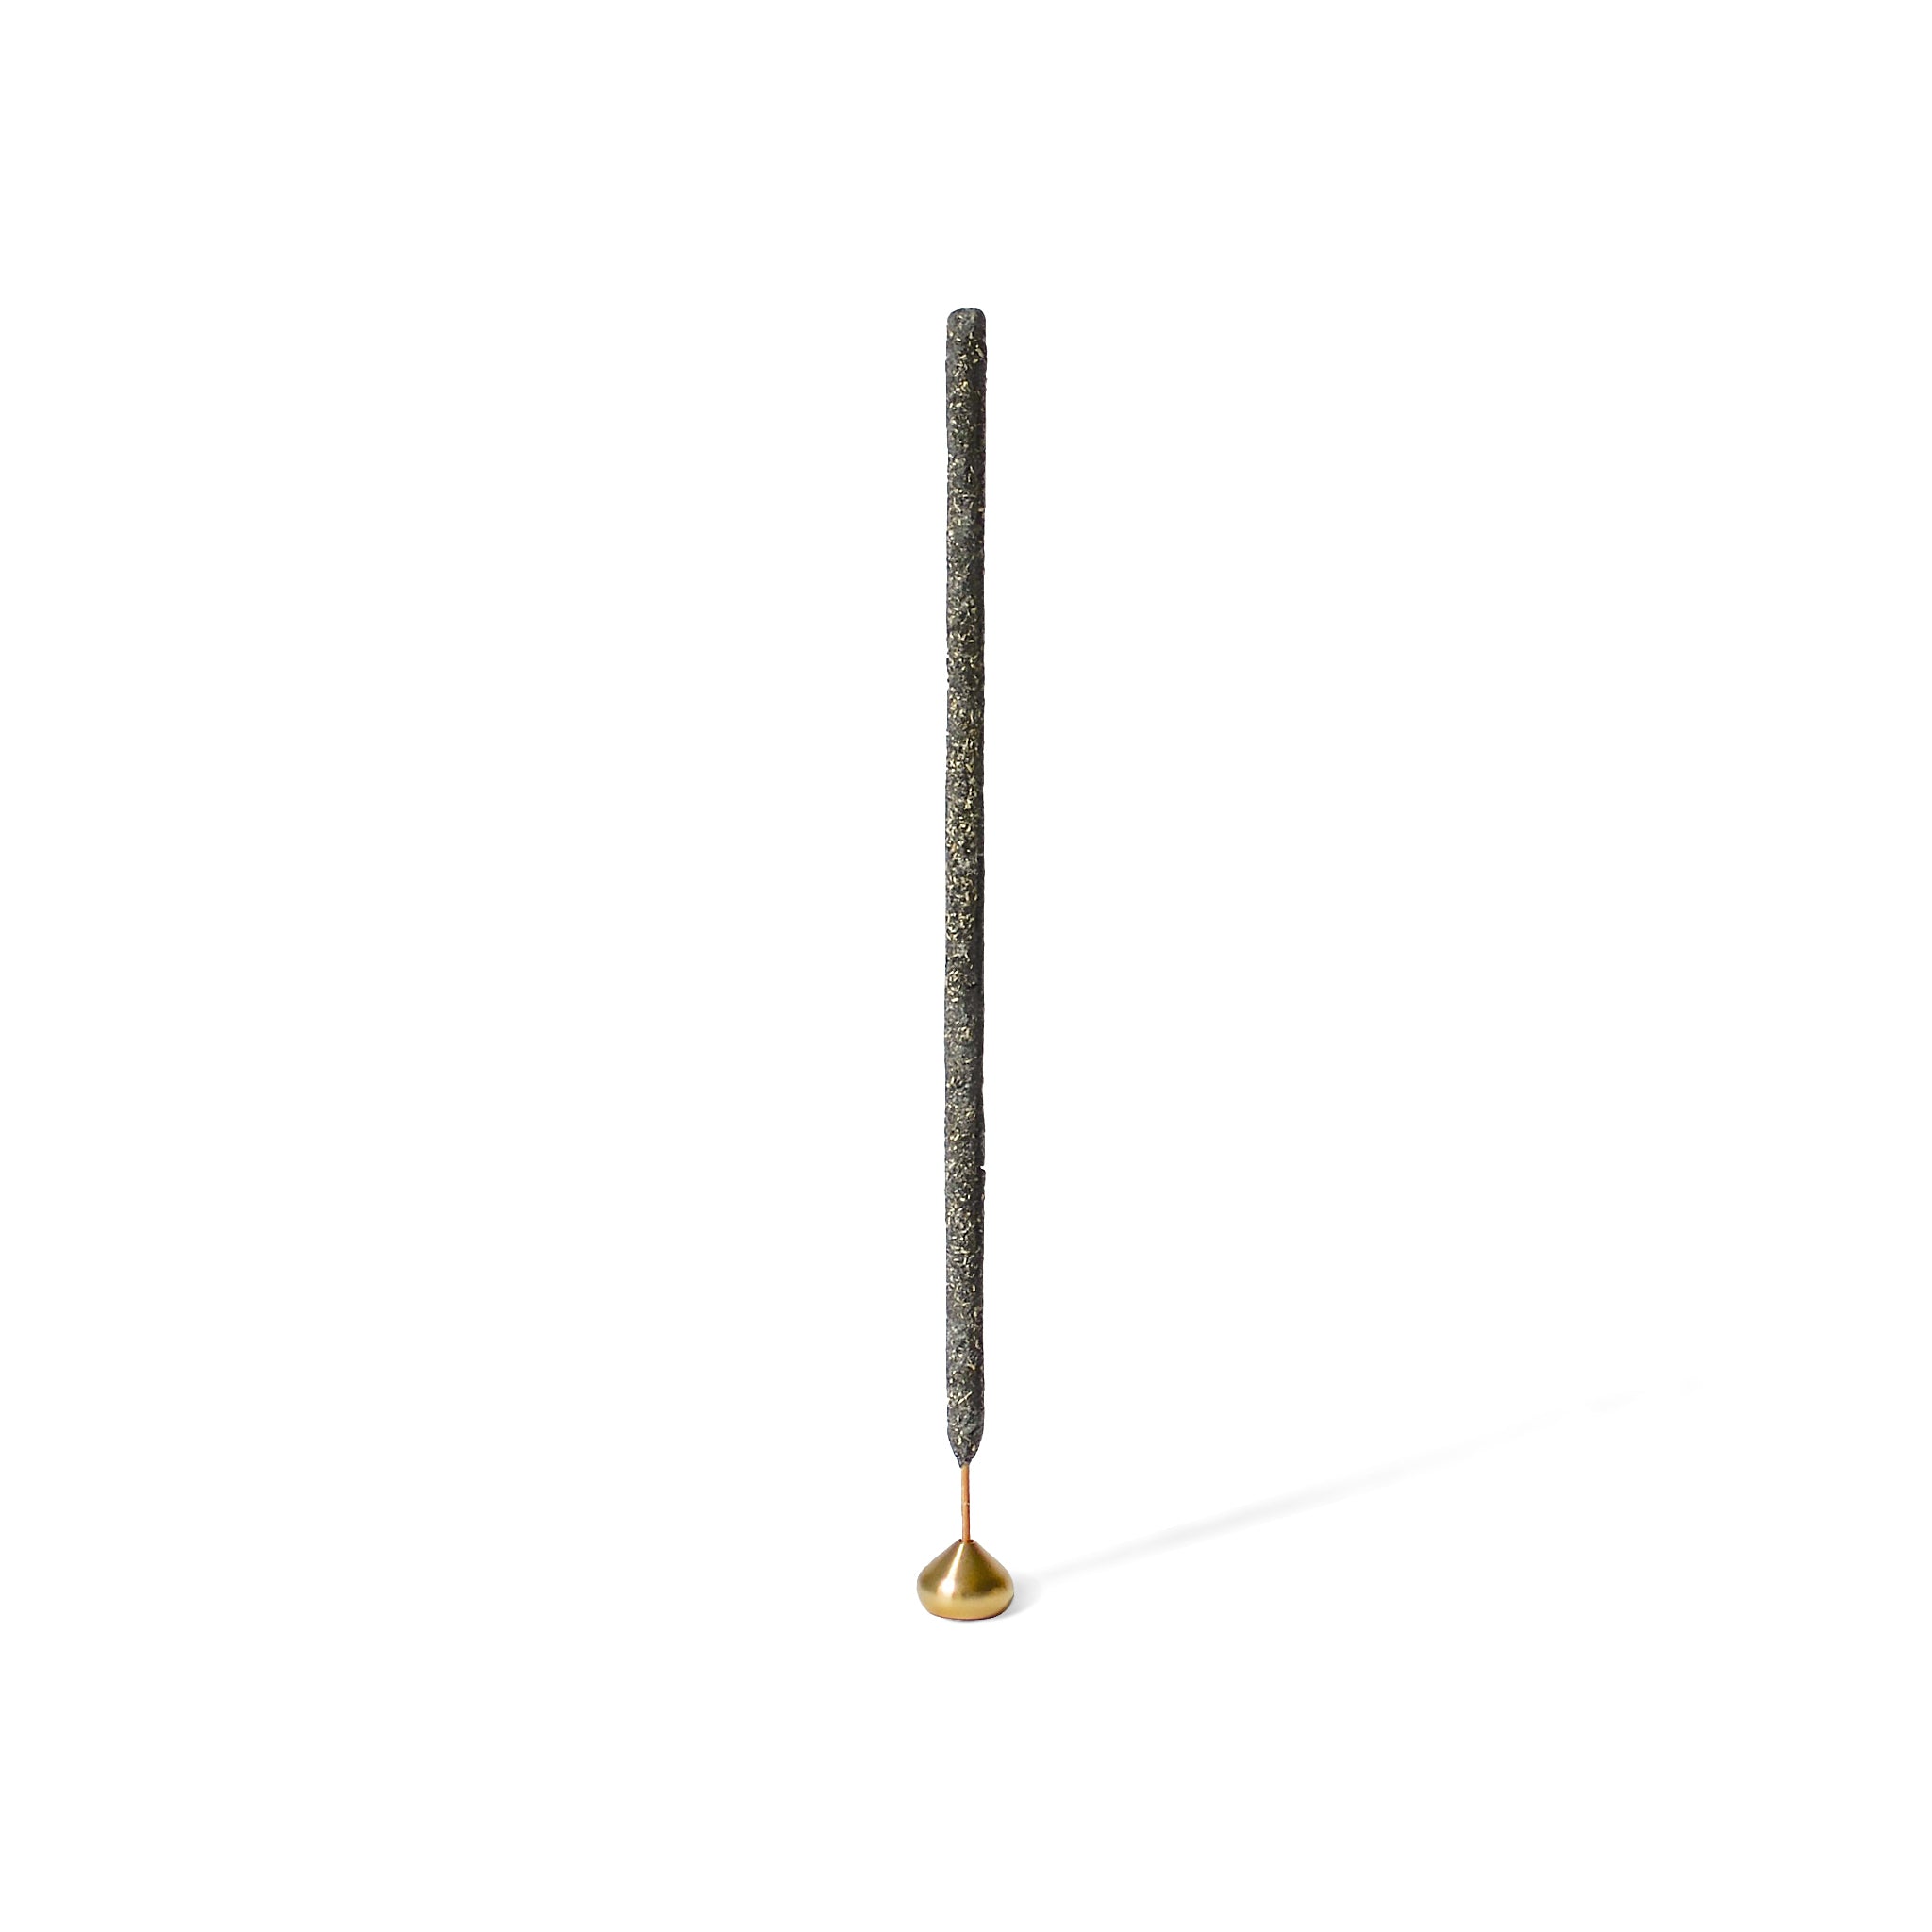 copal incense with an incense holder with a brass and medium waterdrop shape